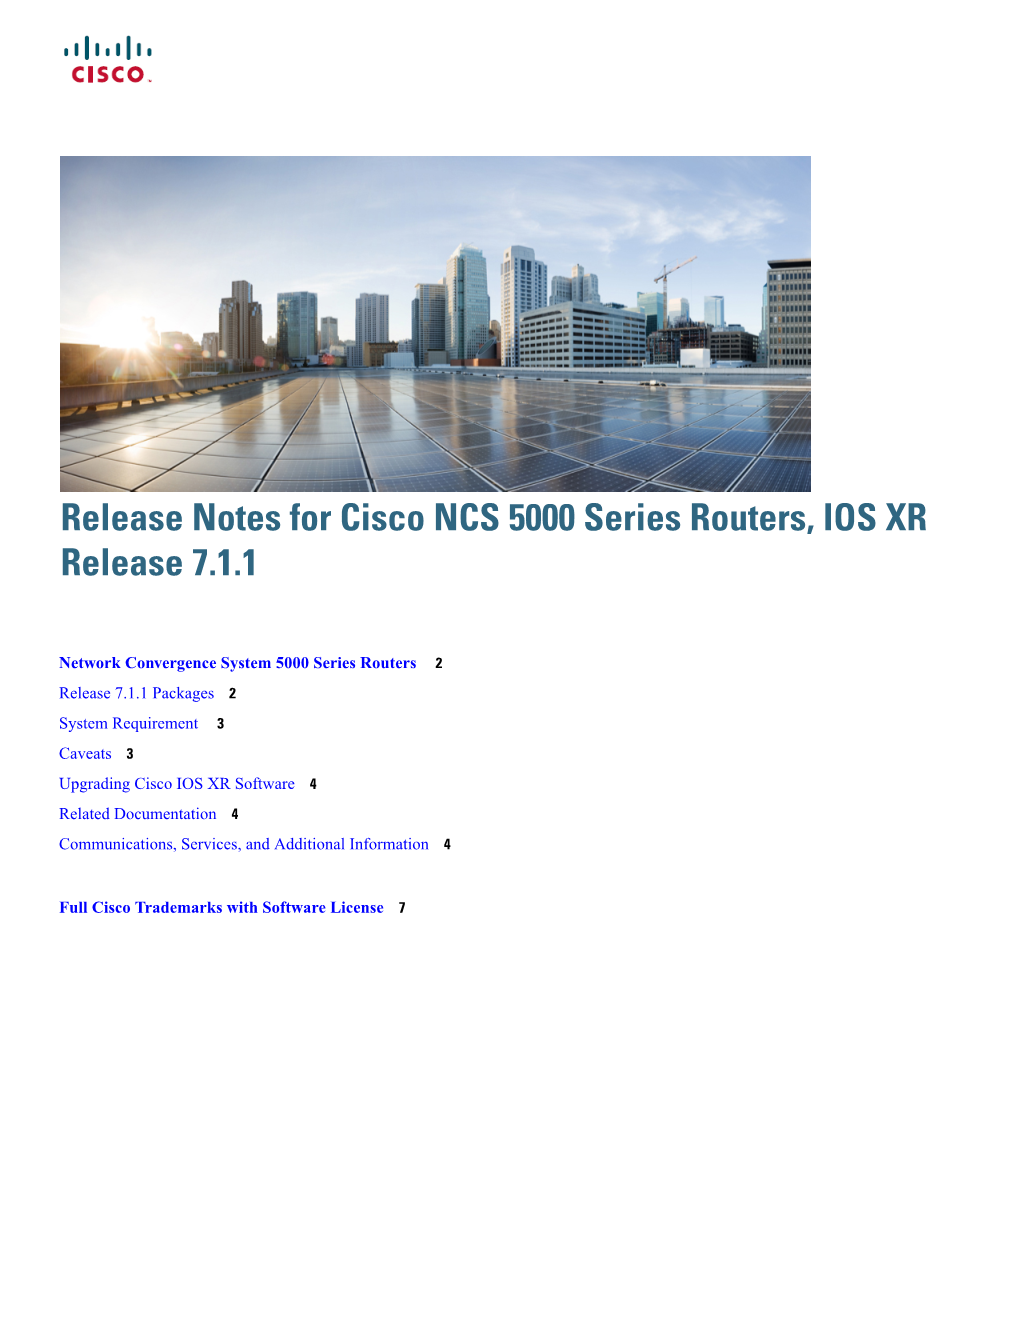 Release Notes for Cisco NCS 5000 Series Routers, IOS XR Release 7.1.1